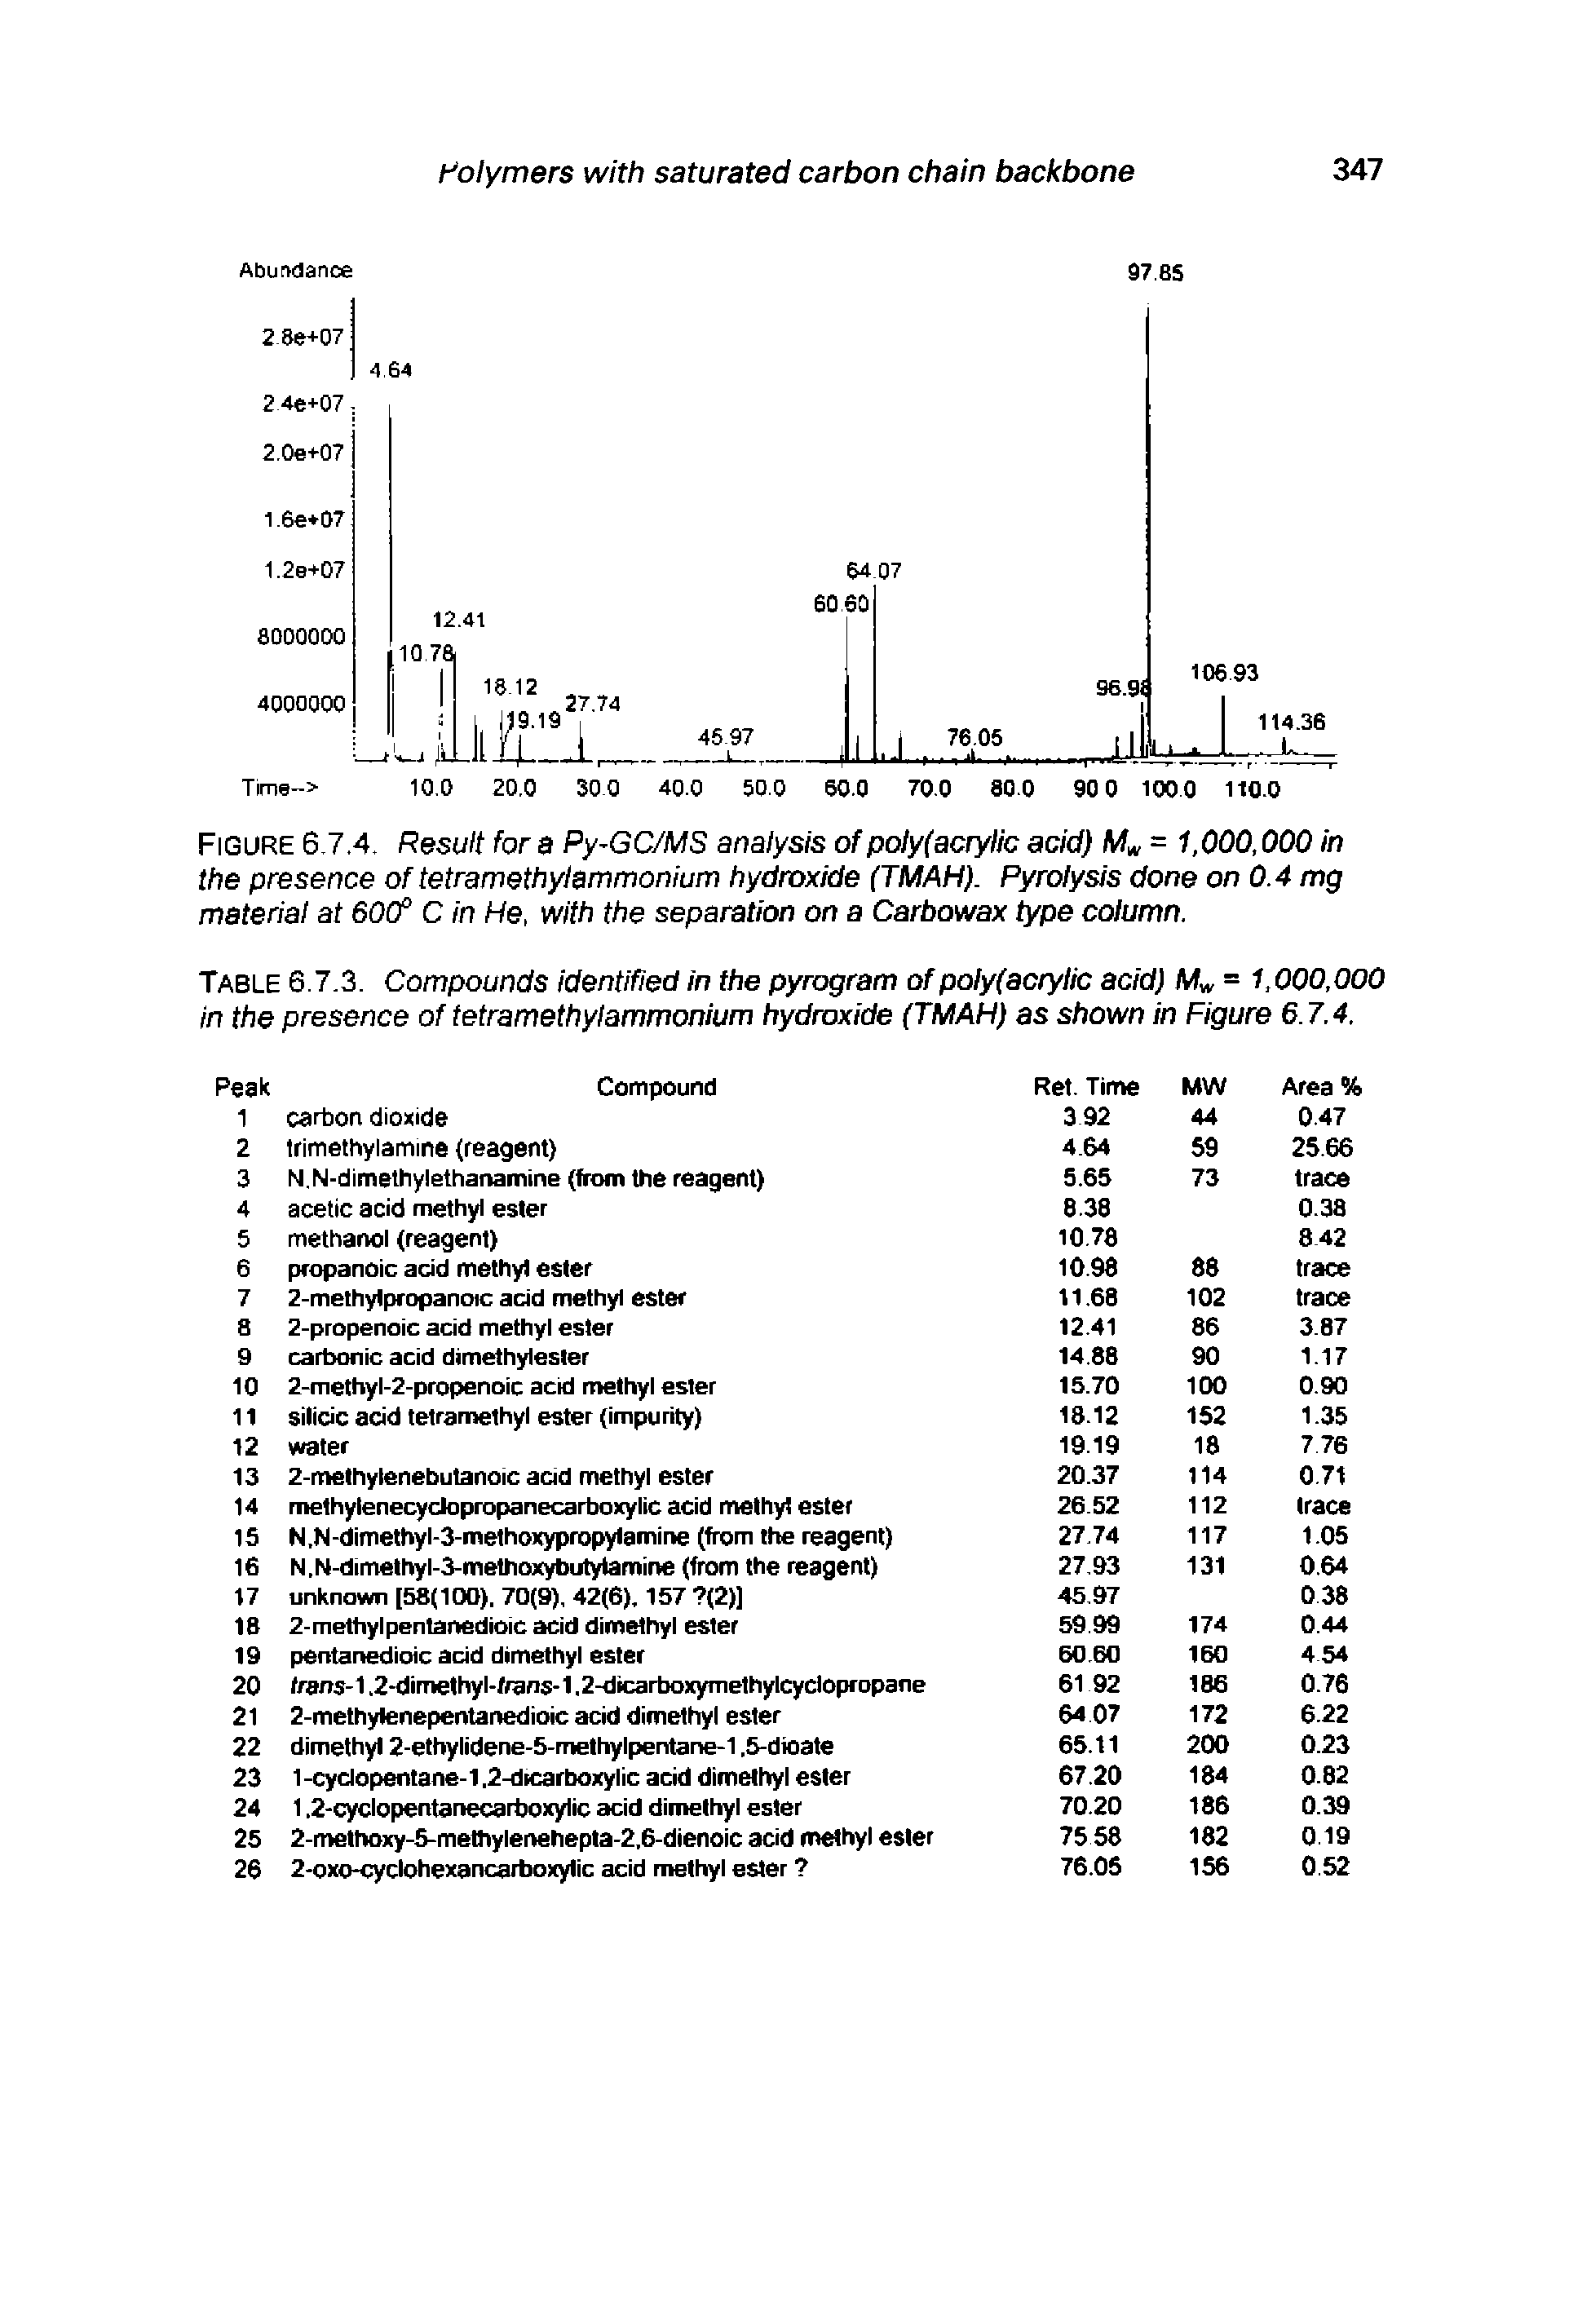 Table 6.7.3. Compounds identified in the pyrogram of polyfacrylic acid) Mw = 1,000,000 in the presence of tetramethylammonium hydroxide (TMAH) as shown in Figure 6.7.4.